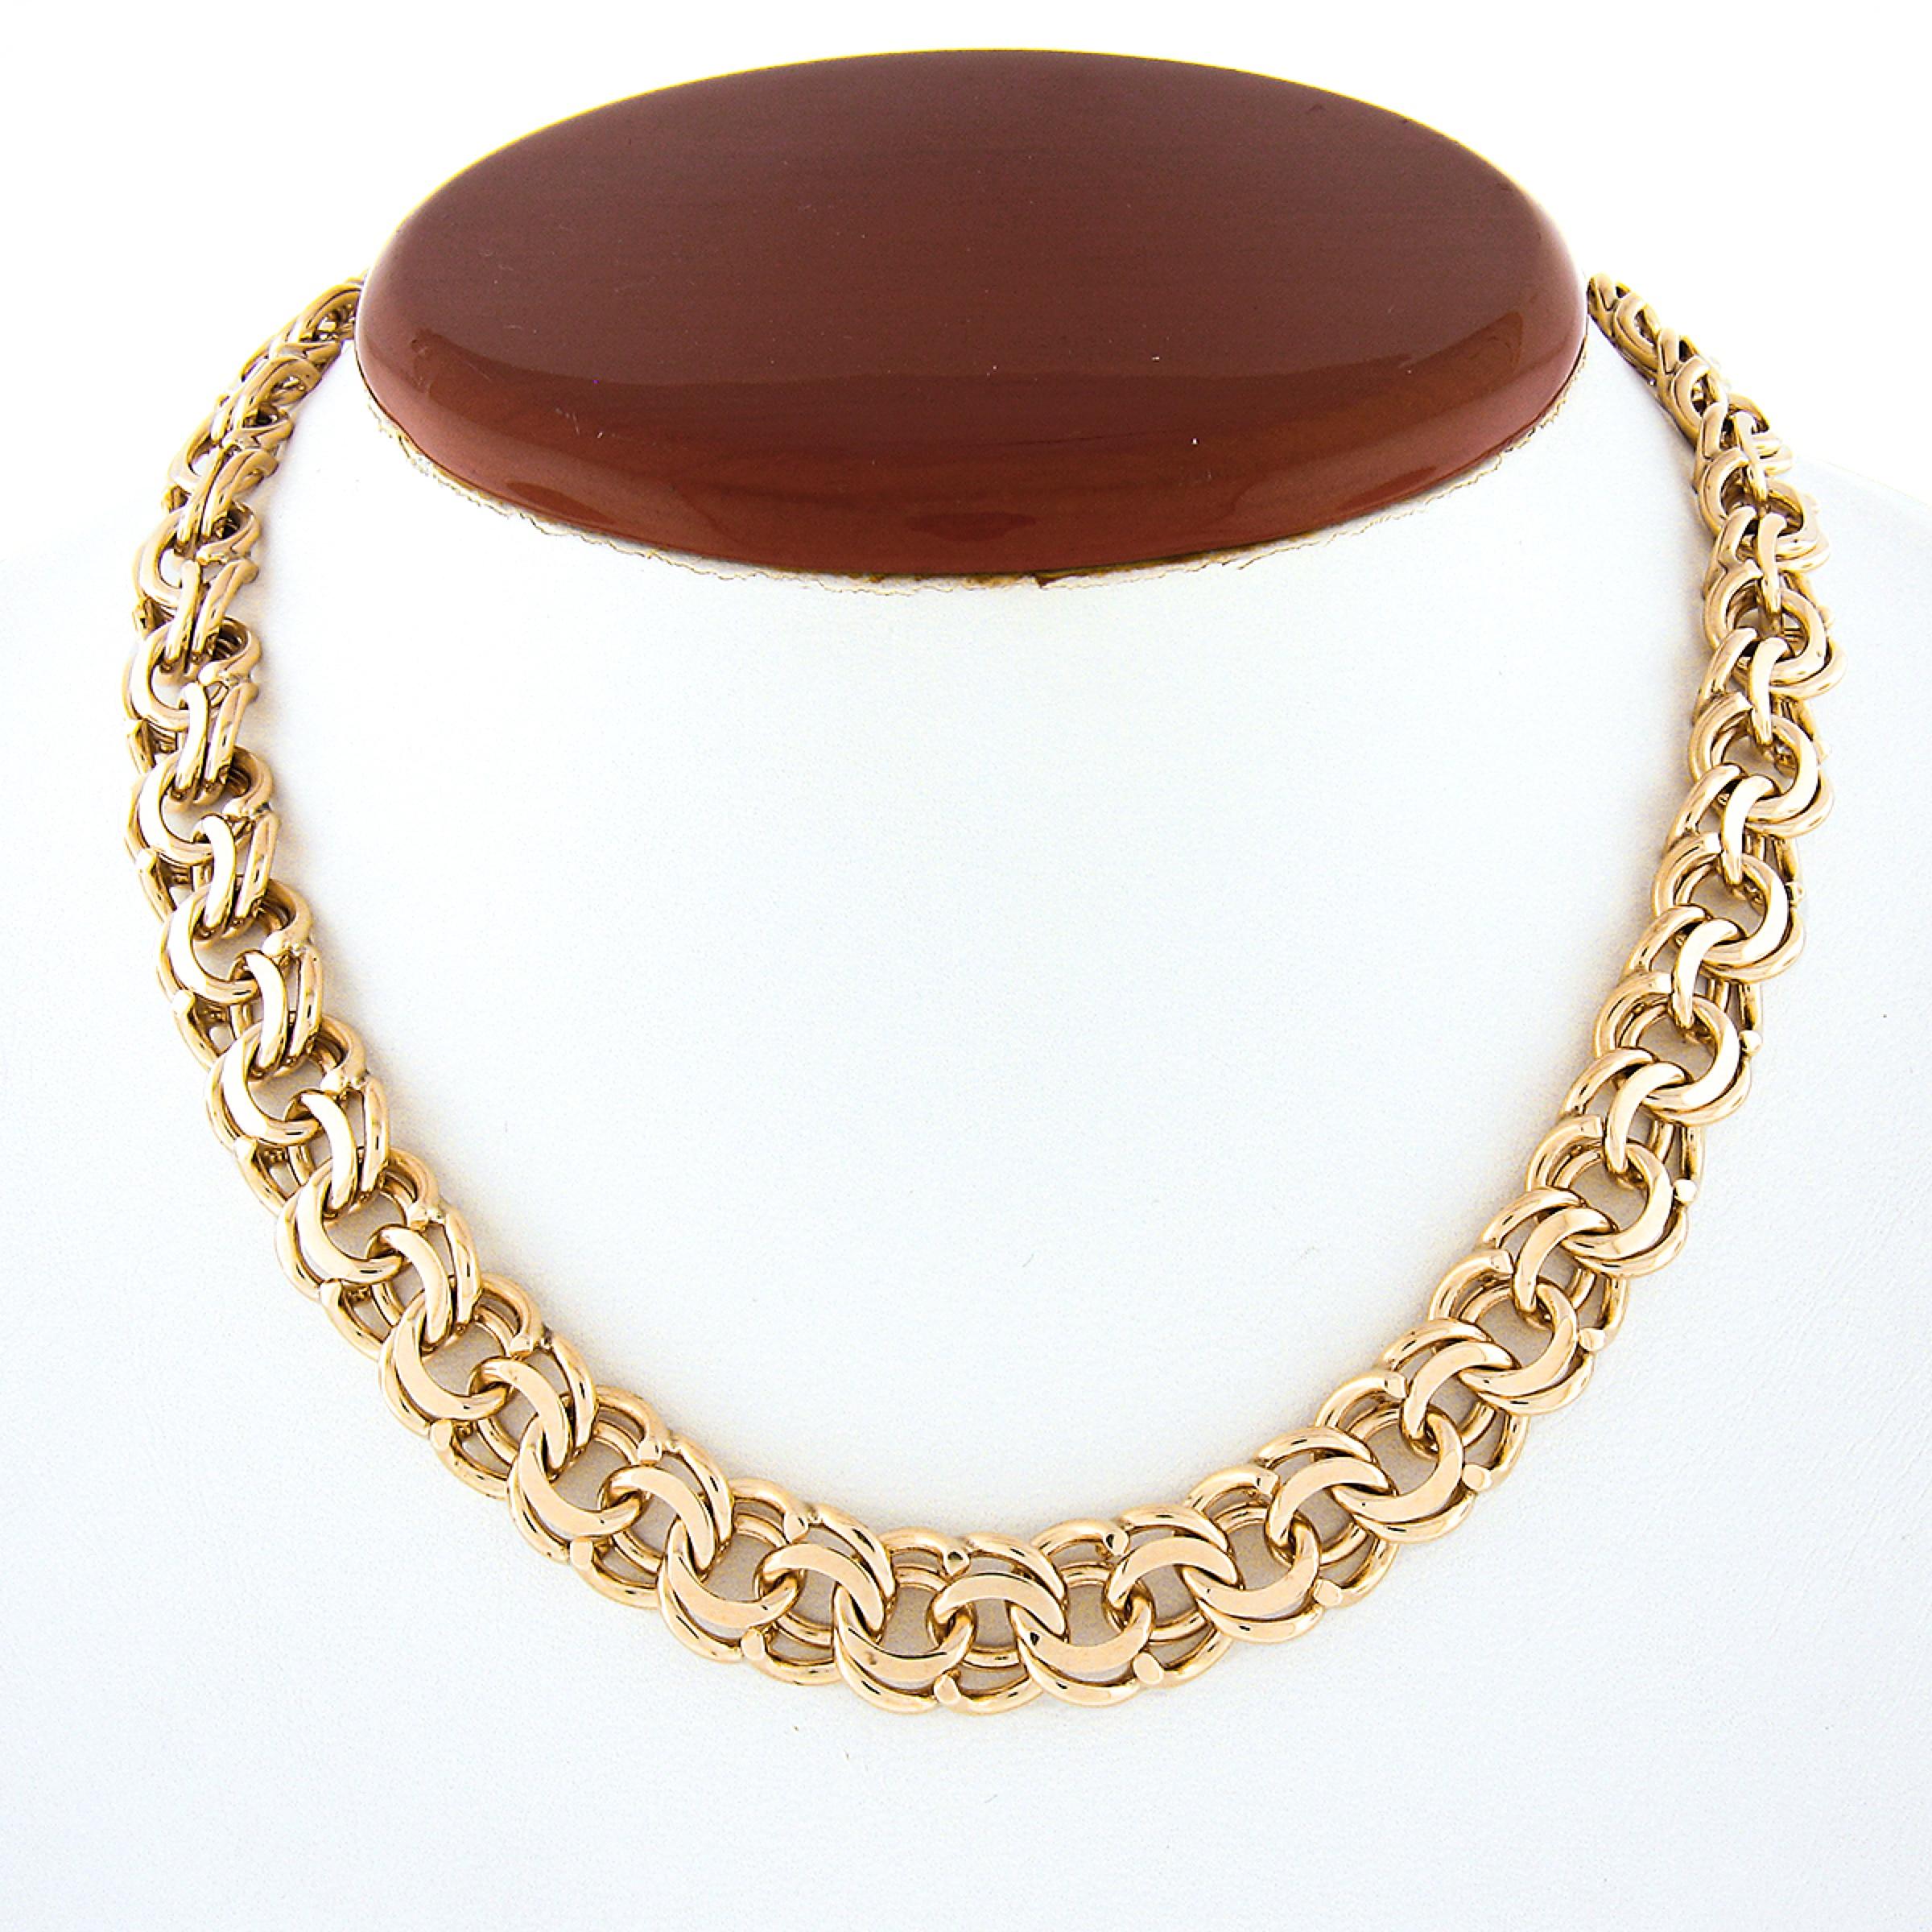 Here we have a gorgeous chain choker necklace crafted in solid 14k yellow gold featuring a double loop and open ring link with a nice high polished finish throughout. This substantial chain measures 15.25 inches in wearable length and 11.2mm wide,